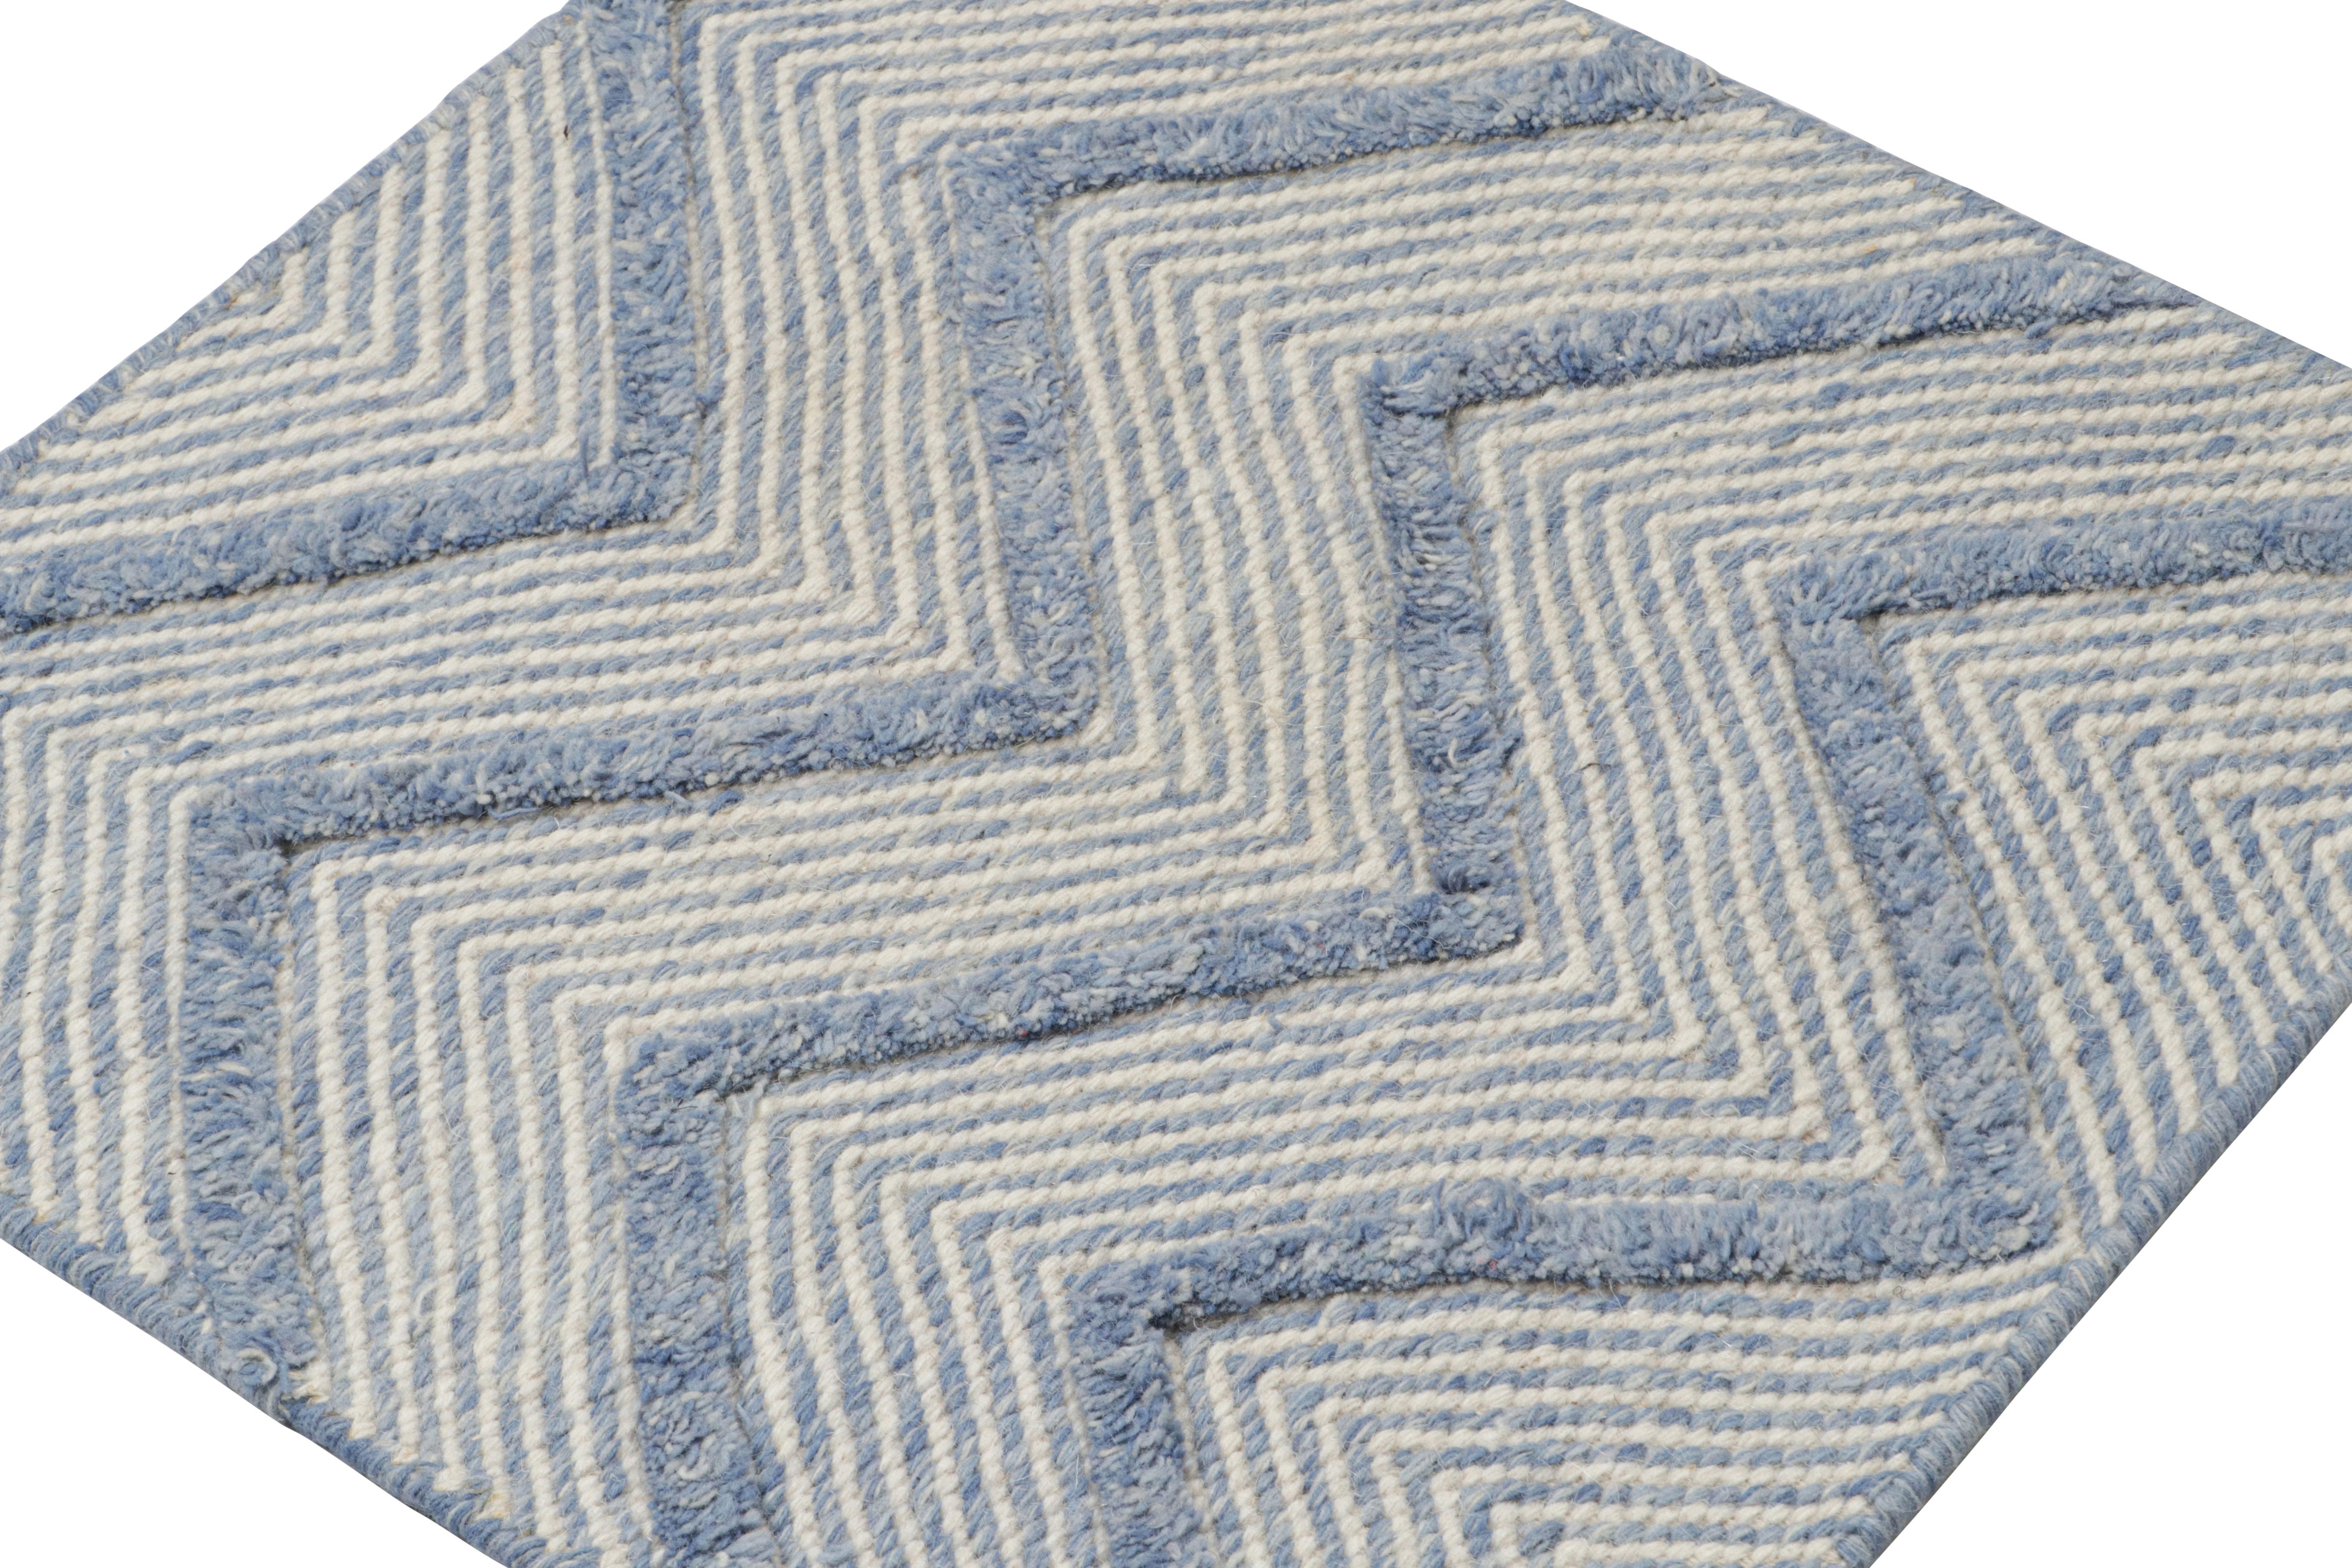 Handwoven in wool, a 2x2 scatter rug from Rug & Kilim’s modern selections.

On the Design

The piece plays flatweave and pile together as seen in the larger chevron patterns which sport a shaggy, high-pile texture that stands out from the flatweave